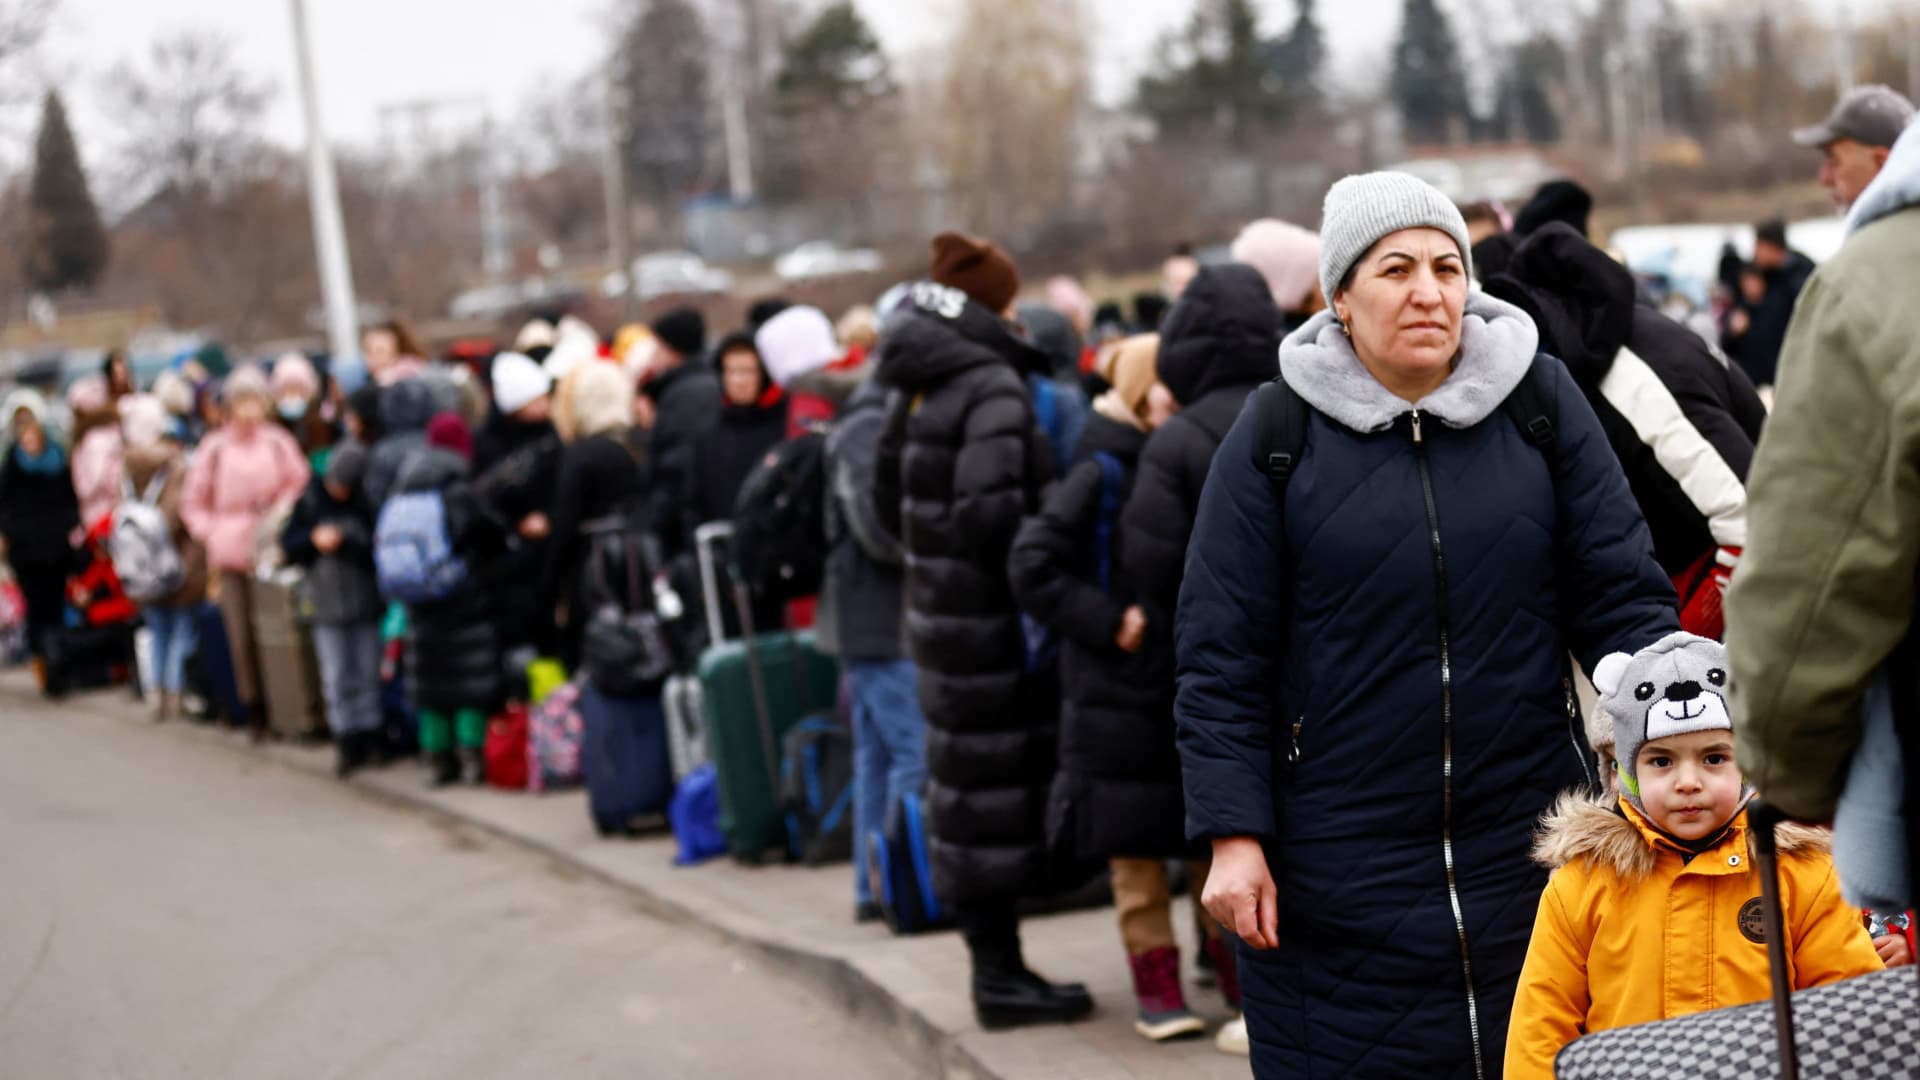 People wait to board a bus after fleeing the Russian invasion of Ukraine, at the border checkpoint in Medyka, Poland, March 4, 2022.